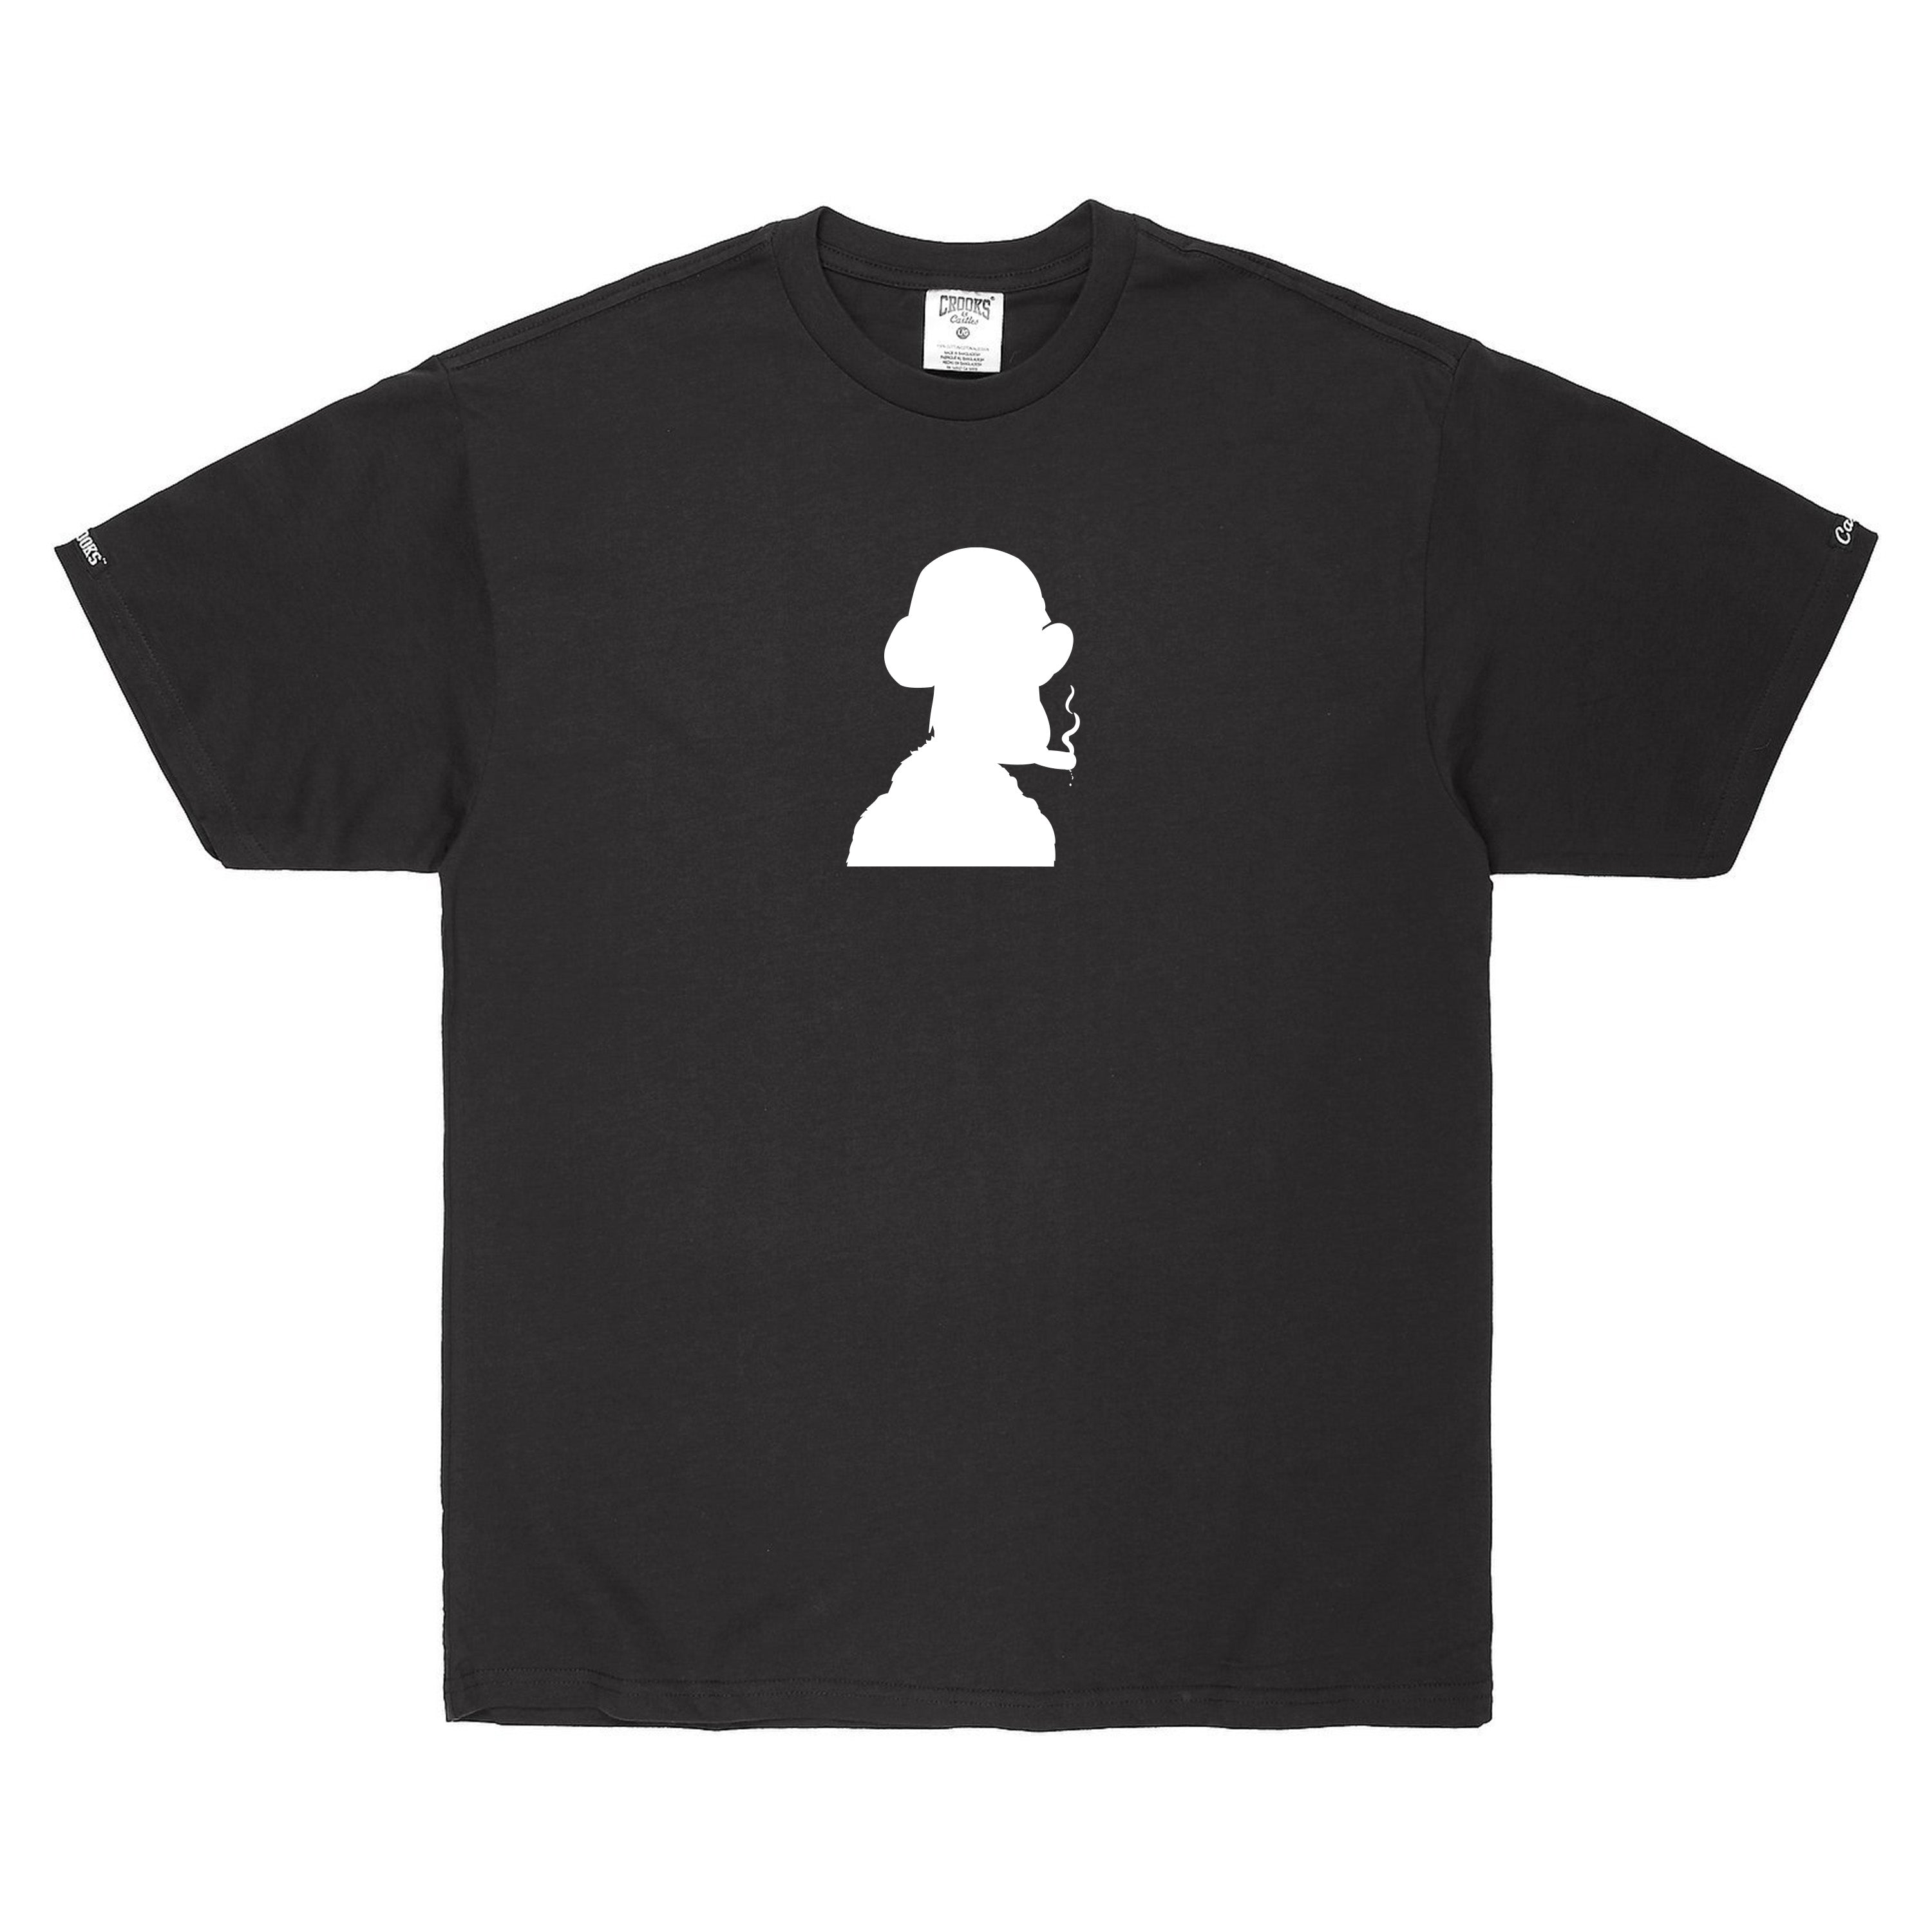 Dr. Bombay Silhouette Tee Black